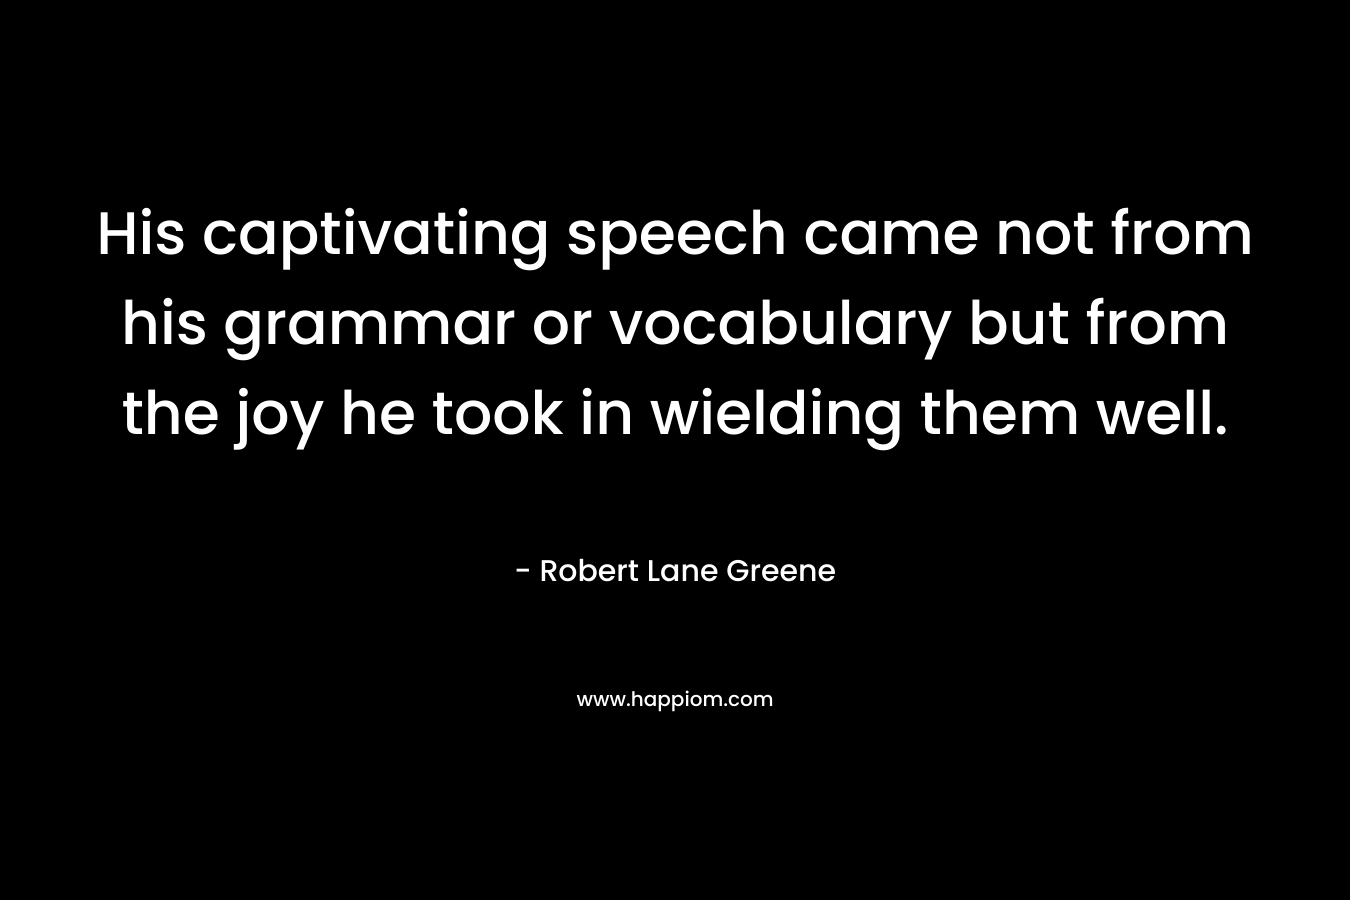 His captivating speech came not from his grammar or vocabulary but from the joy he took in wielding them well.